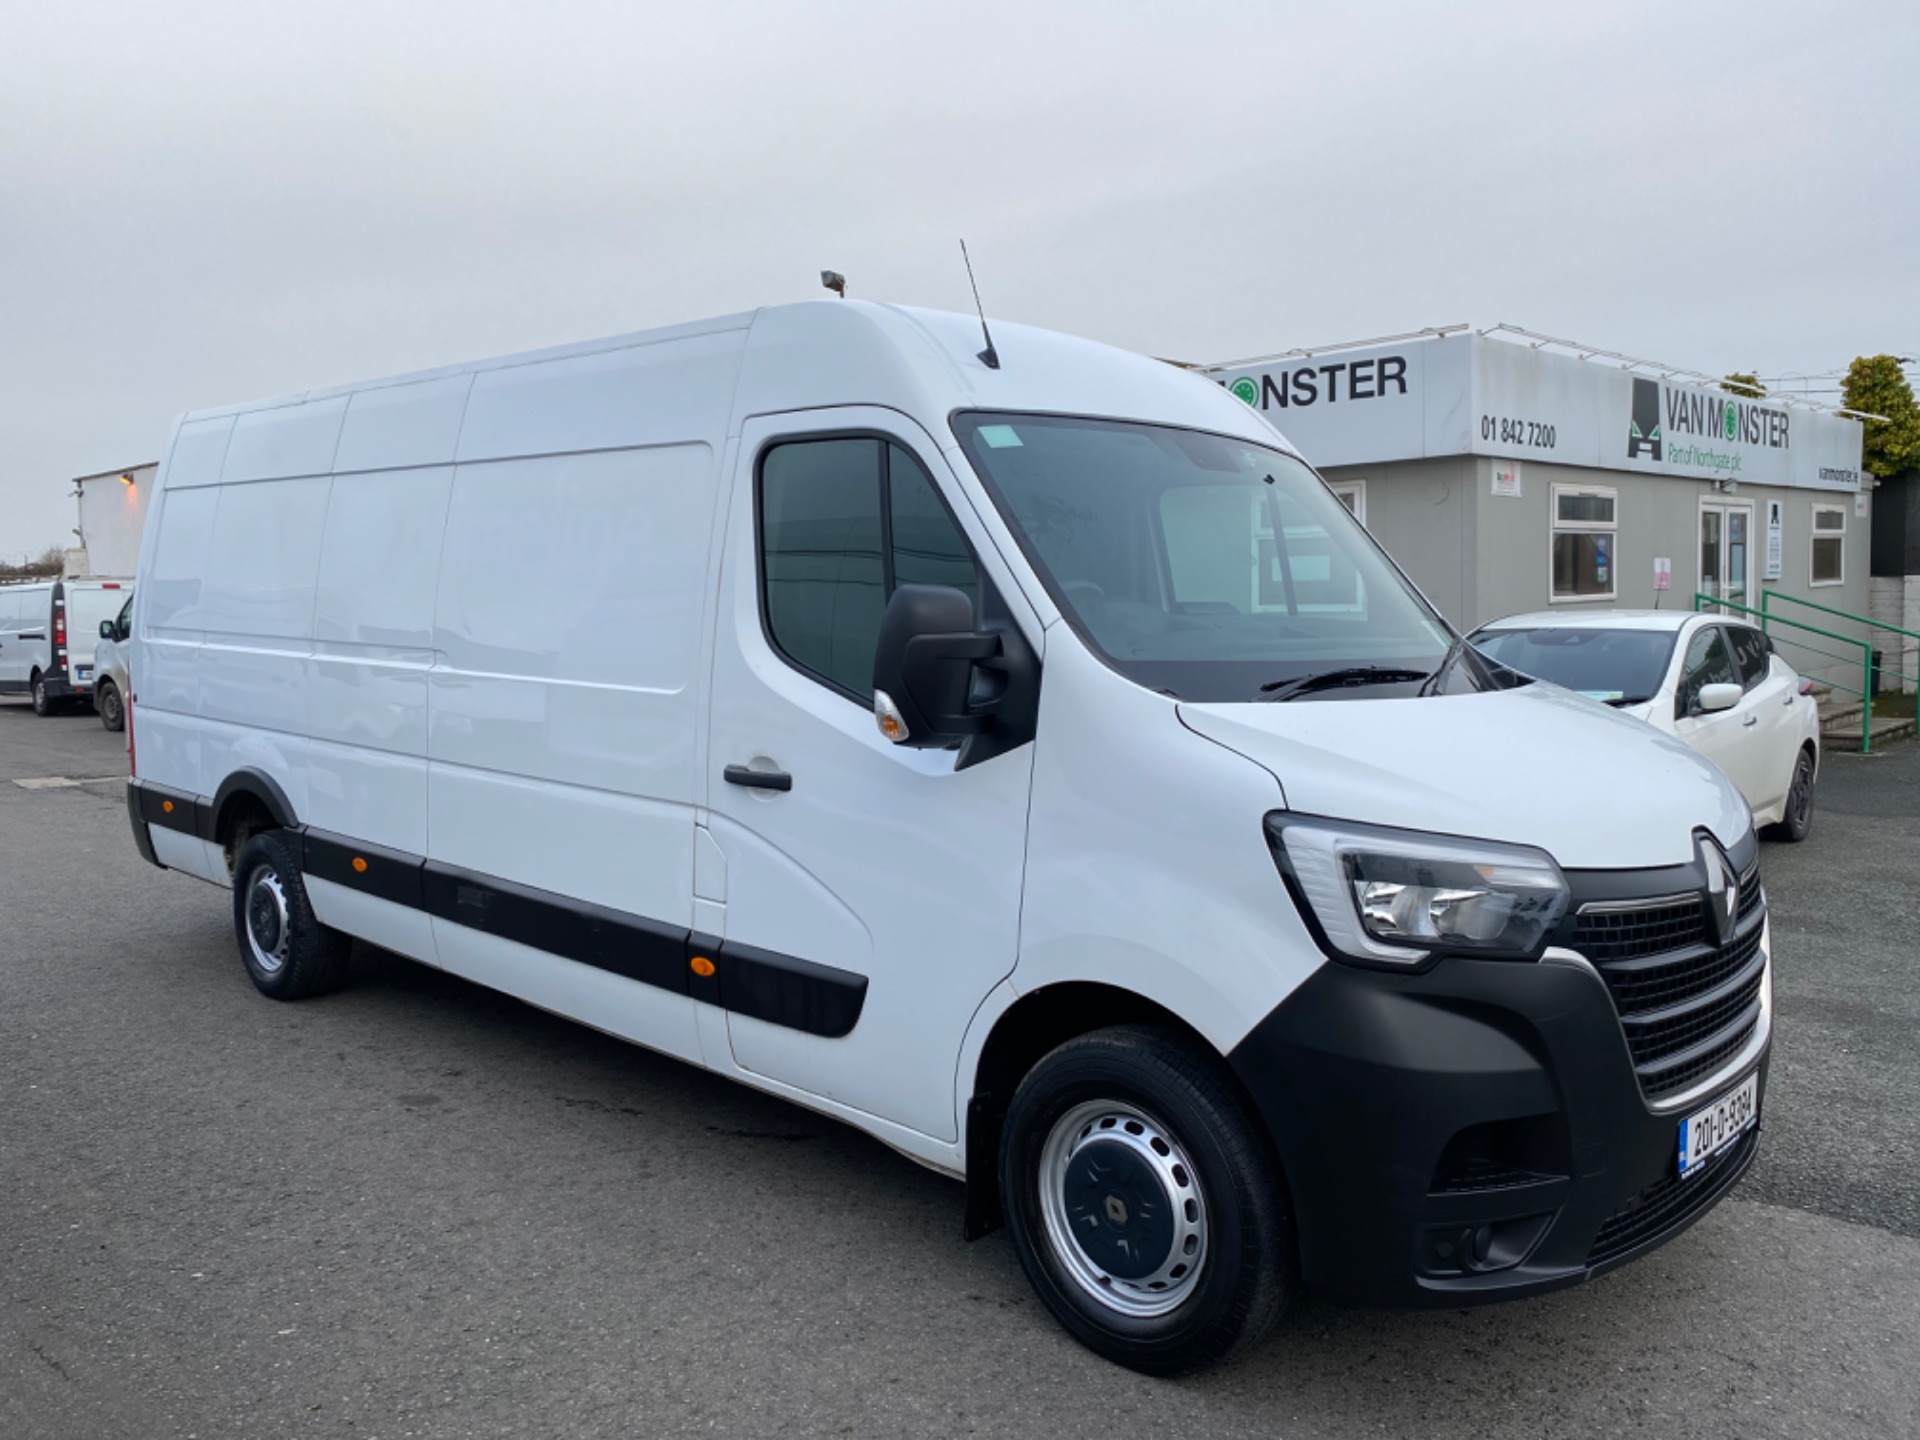 2020 Renault Master RWD LML35 DCI 130 Business MY1 (201D9384) Image 1